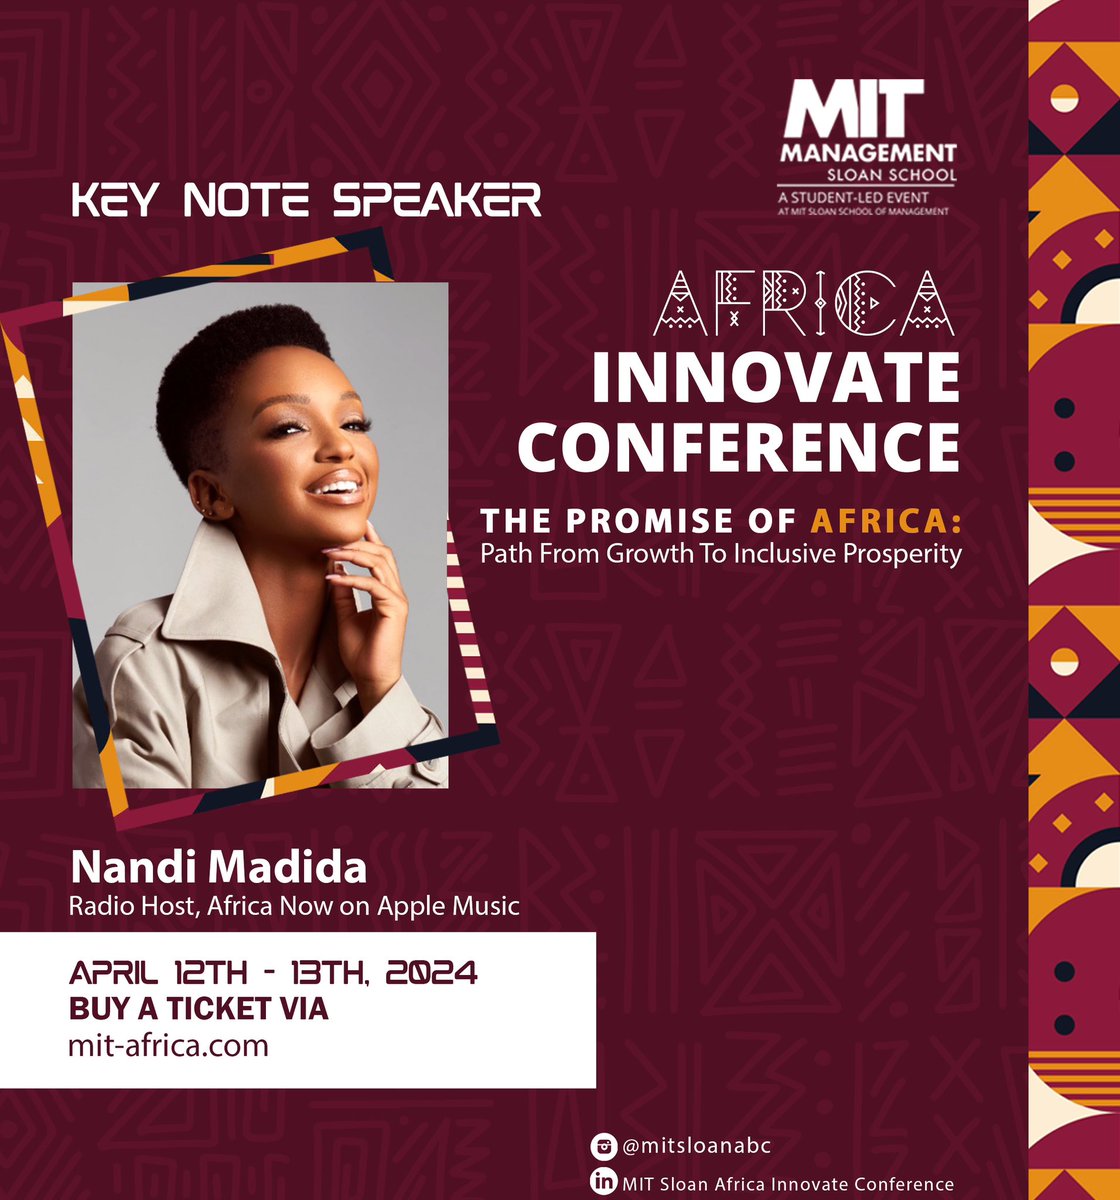 It’s an absolute honour to be speaking at MIT in Boston 🇺🇸. Looking forward to this esteemed conference. 🌍 #africatotheworld